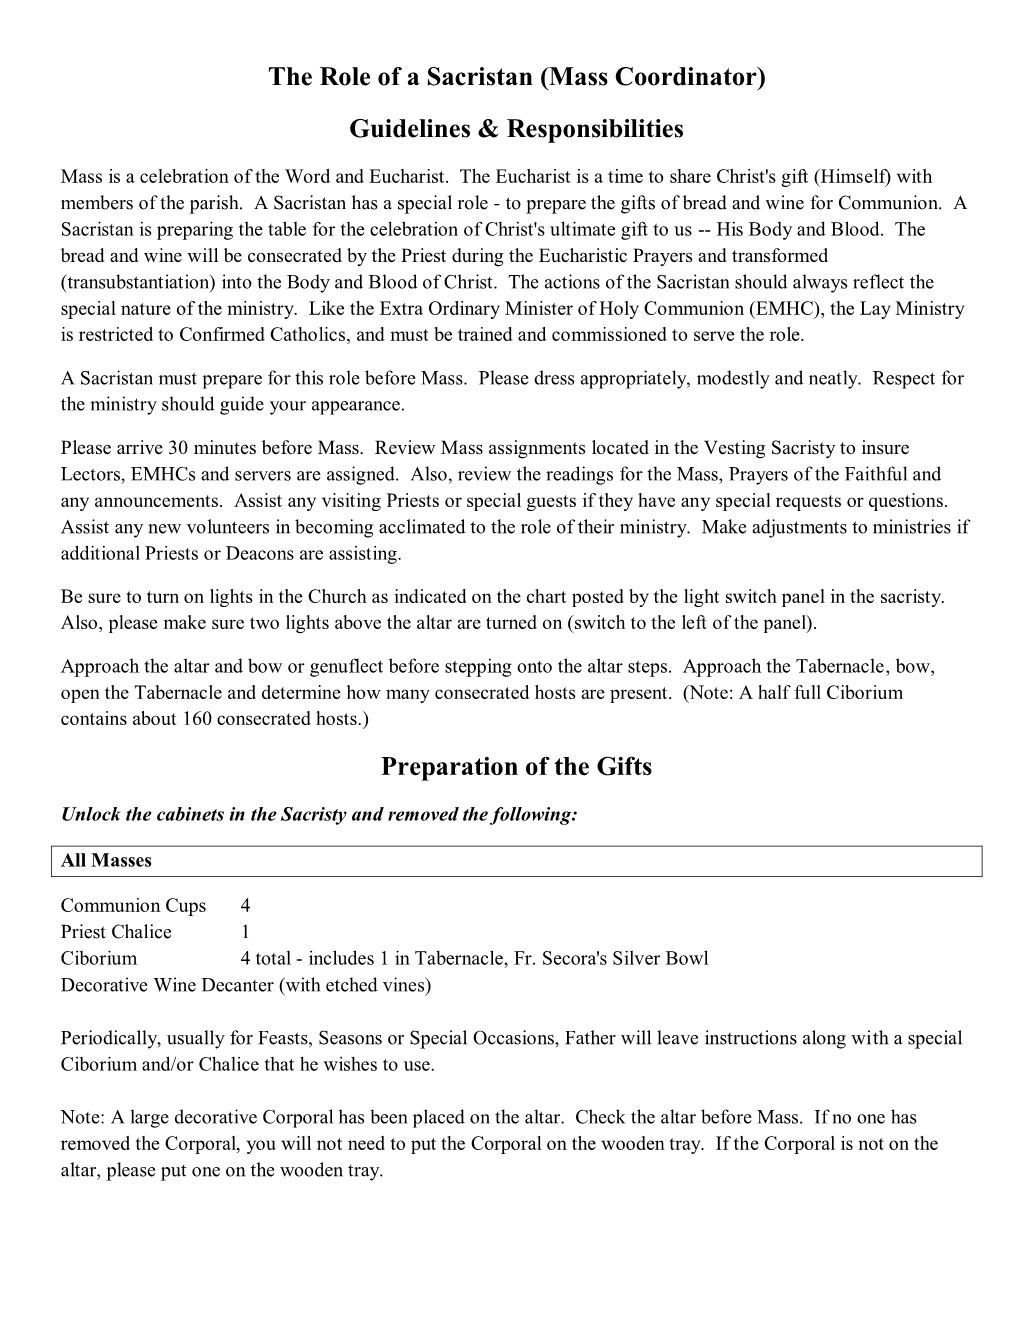 The Role of a Sacristan (Mass Coordinator) Guidelines & Responsibilities Preparation of the Gifts